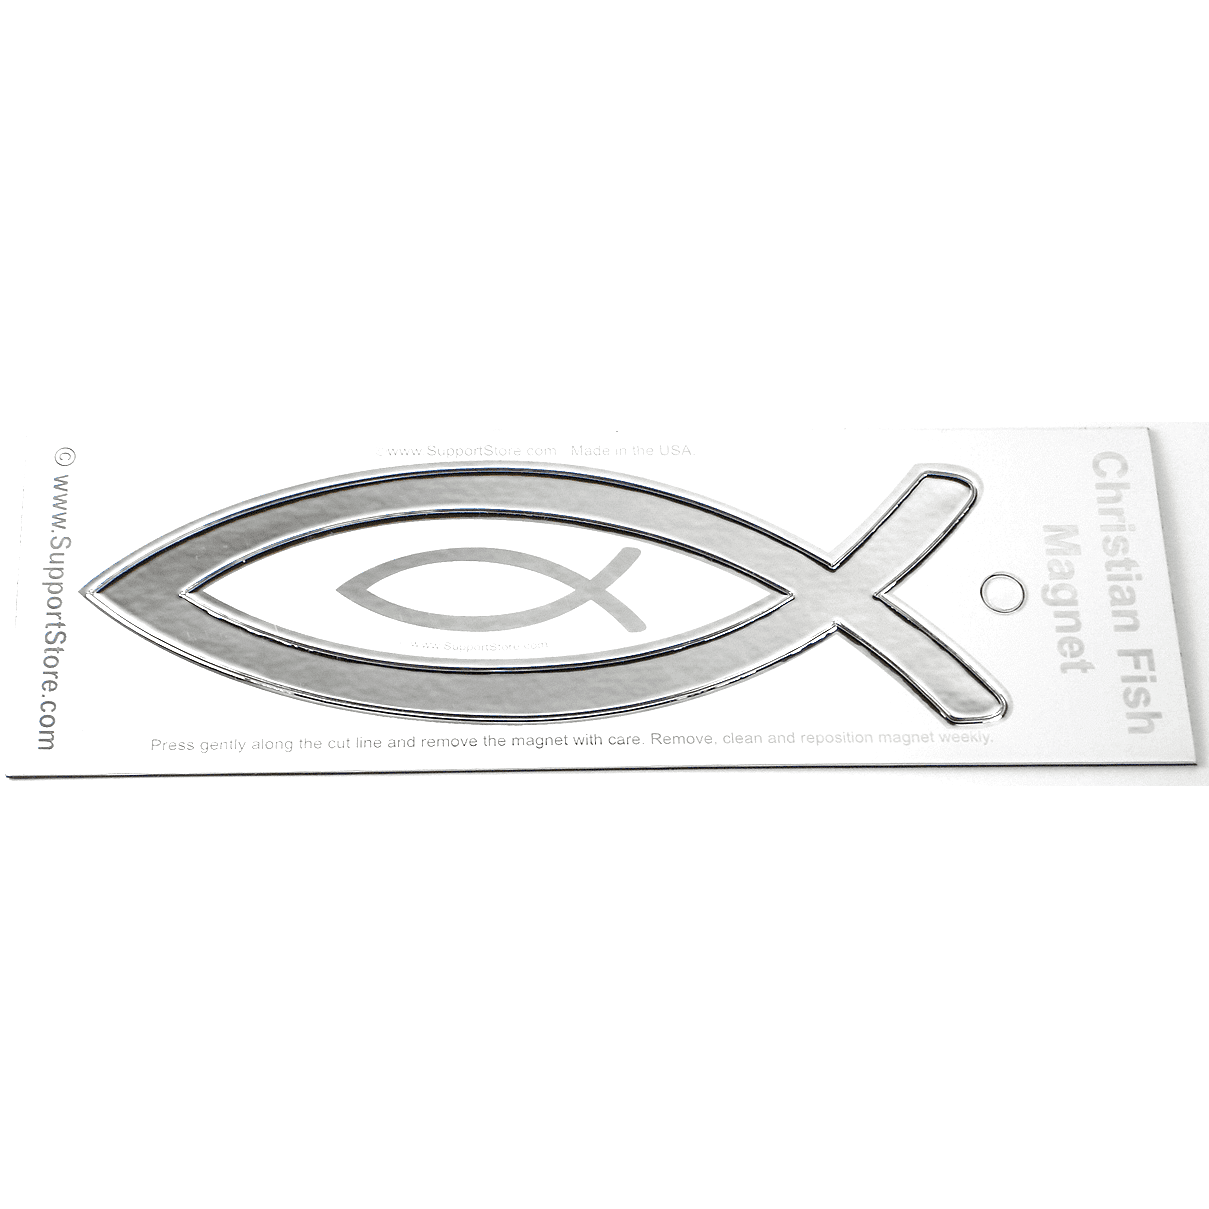 Christian Fish Chrome Look Emblem - Magnetic - Support Store